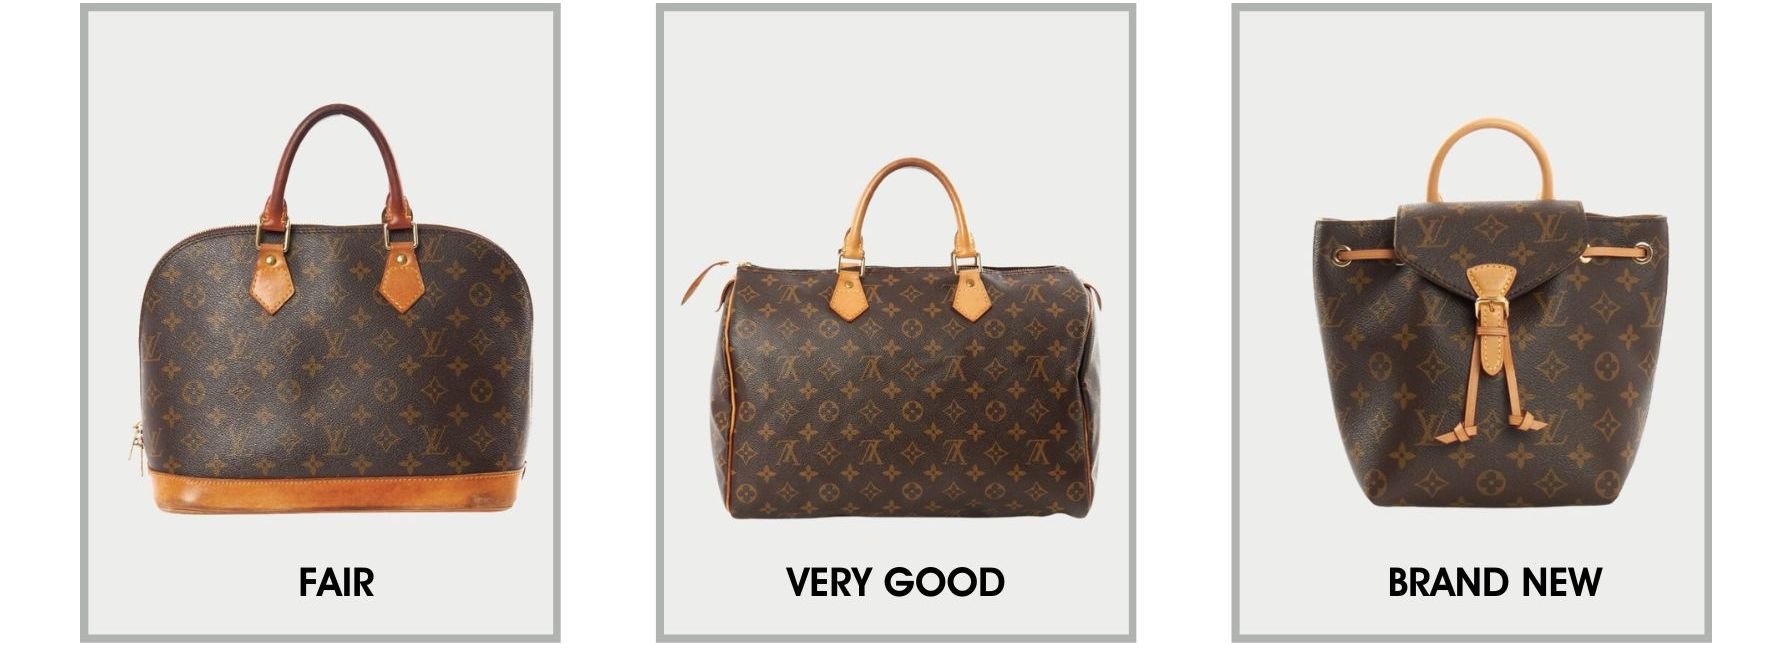 Are Louis Vuitton Bags Leather - A Helpful Look at the Types